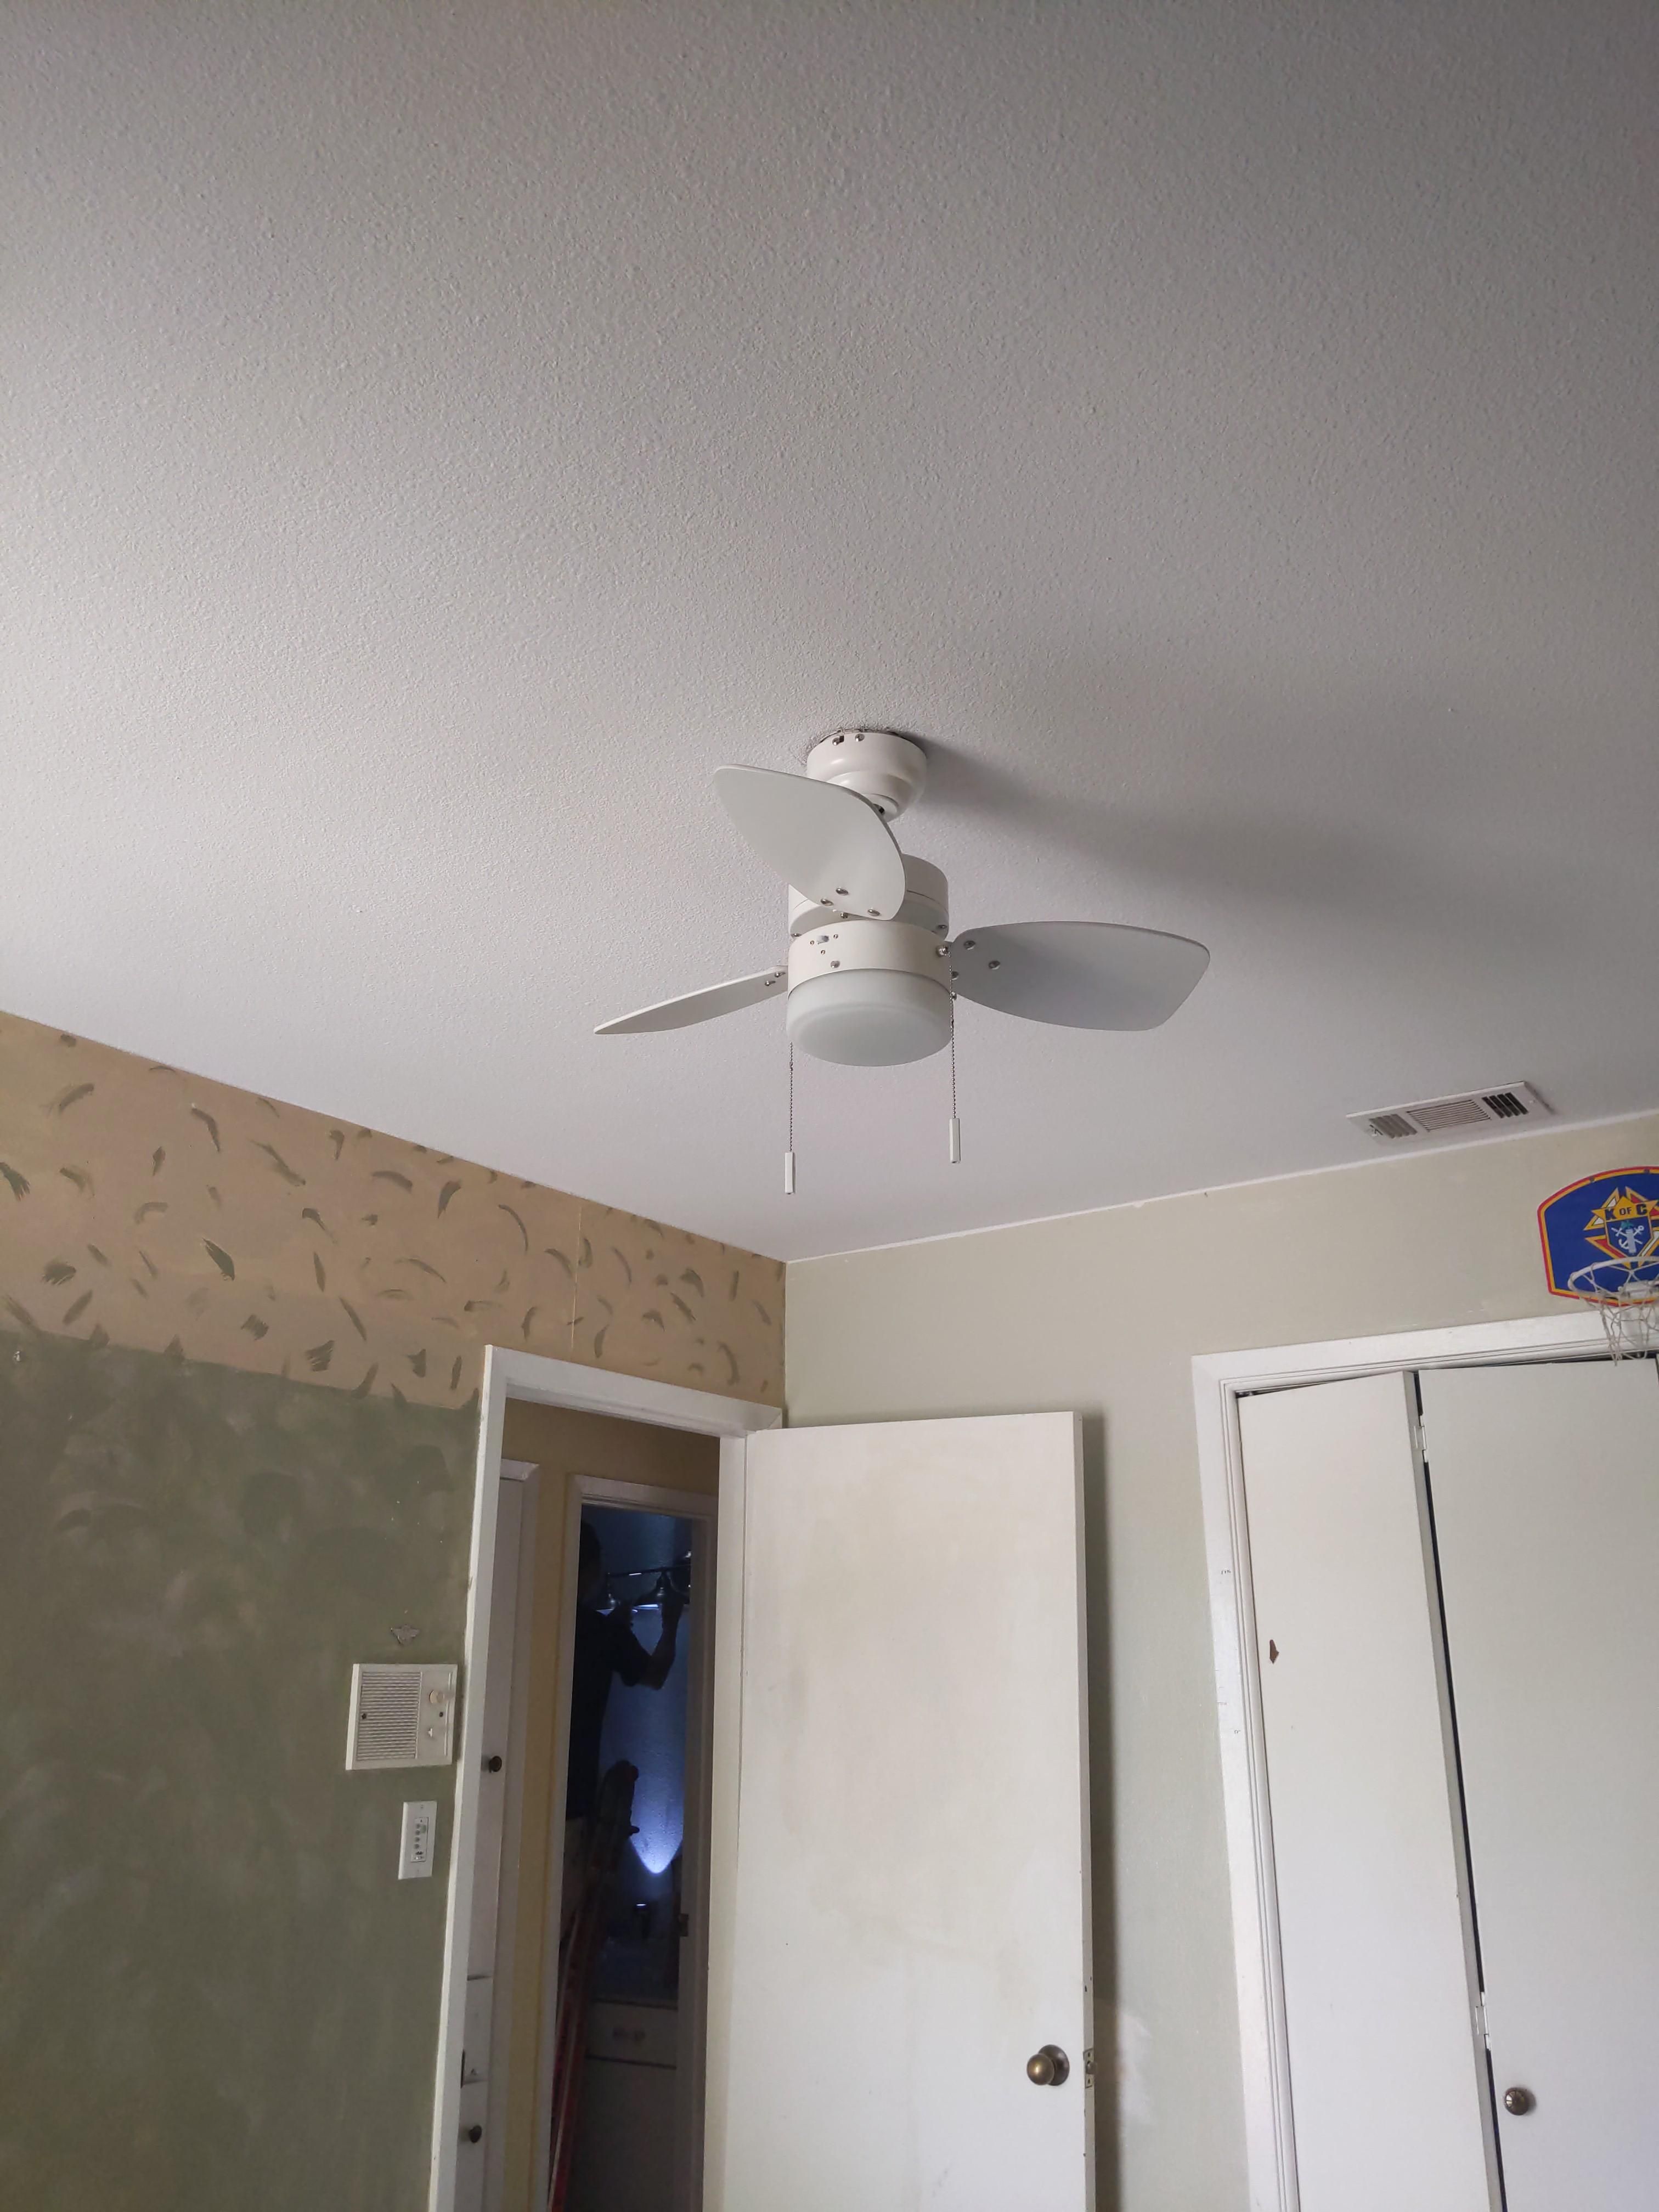 I accidentally bought a tiny ceiling fan...